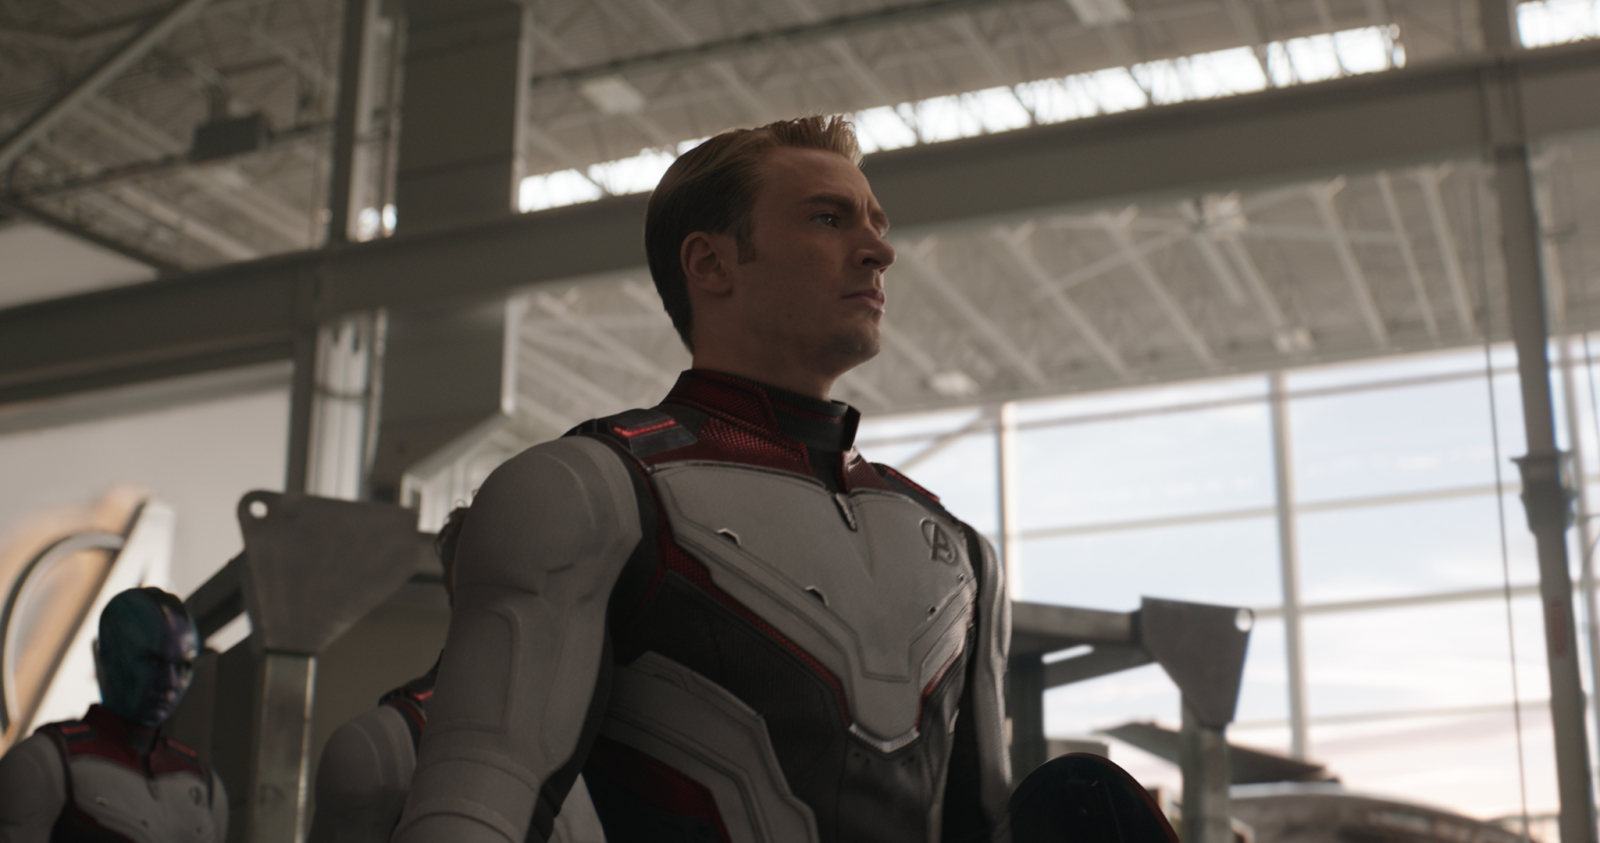 Why Avengers: Endgame will not be released on Netflix